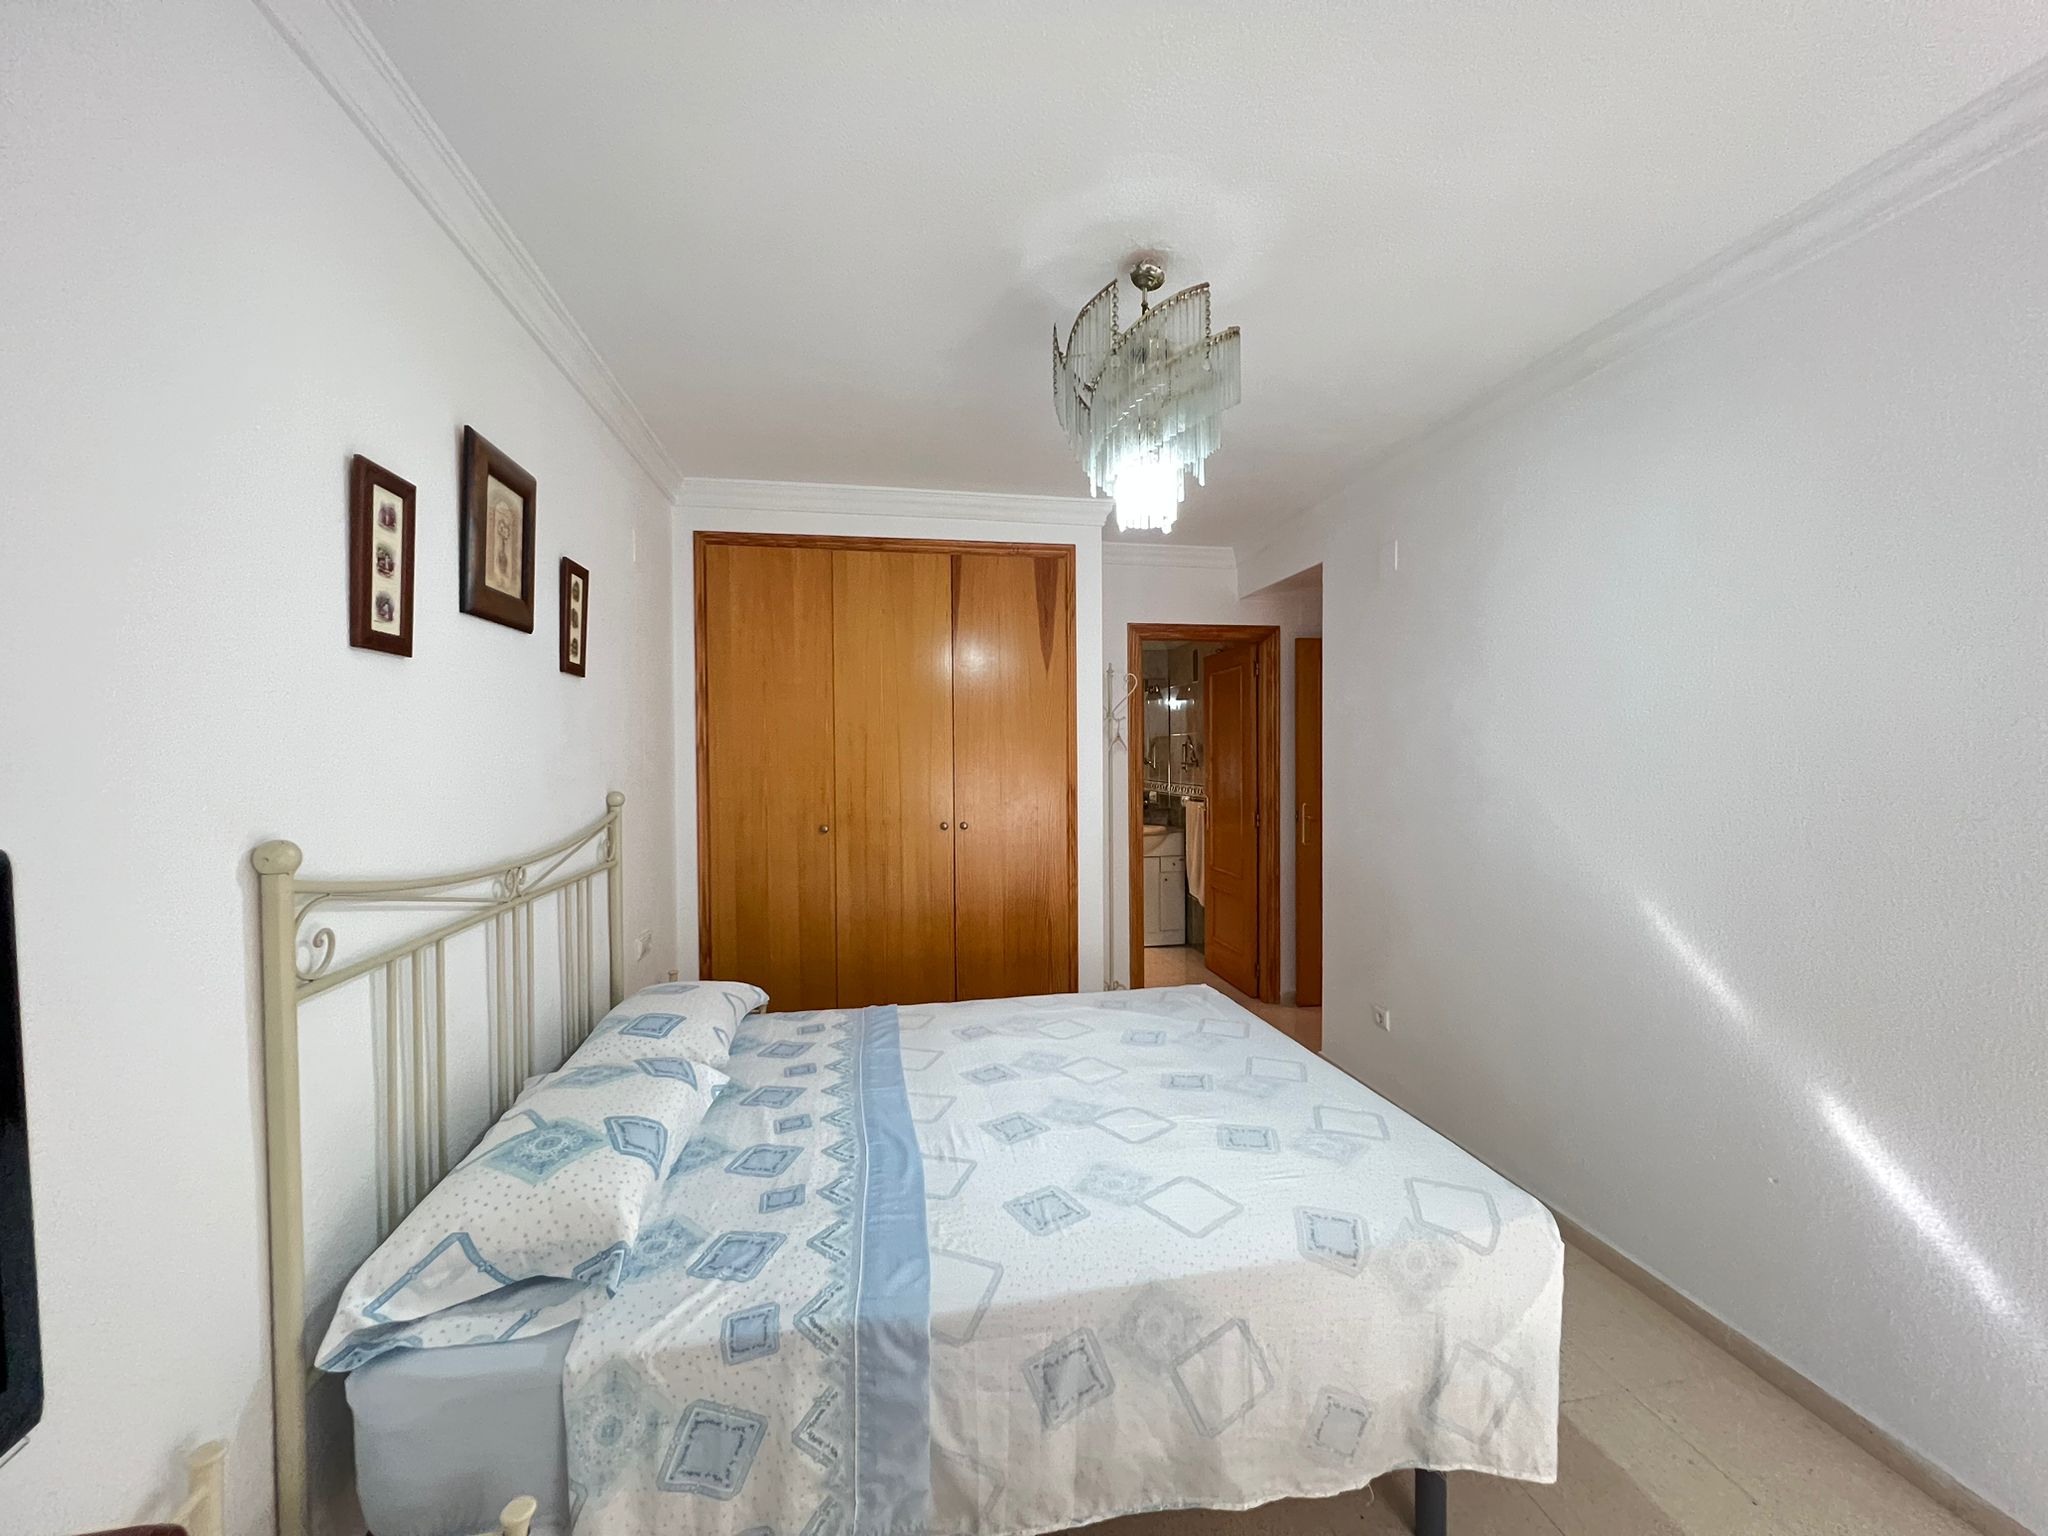 Apartment for sale in the center of Calpe within walking distance of the beaches